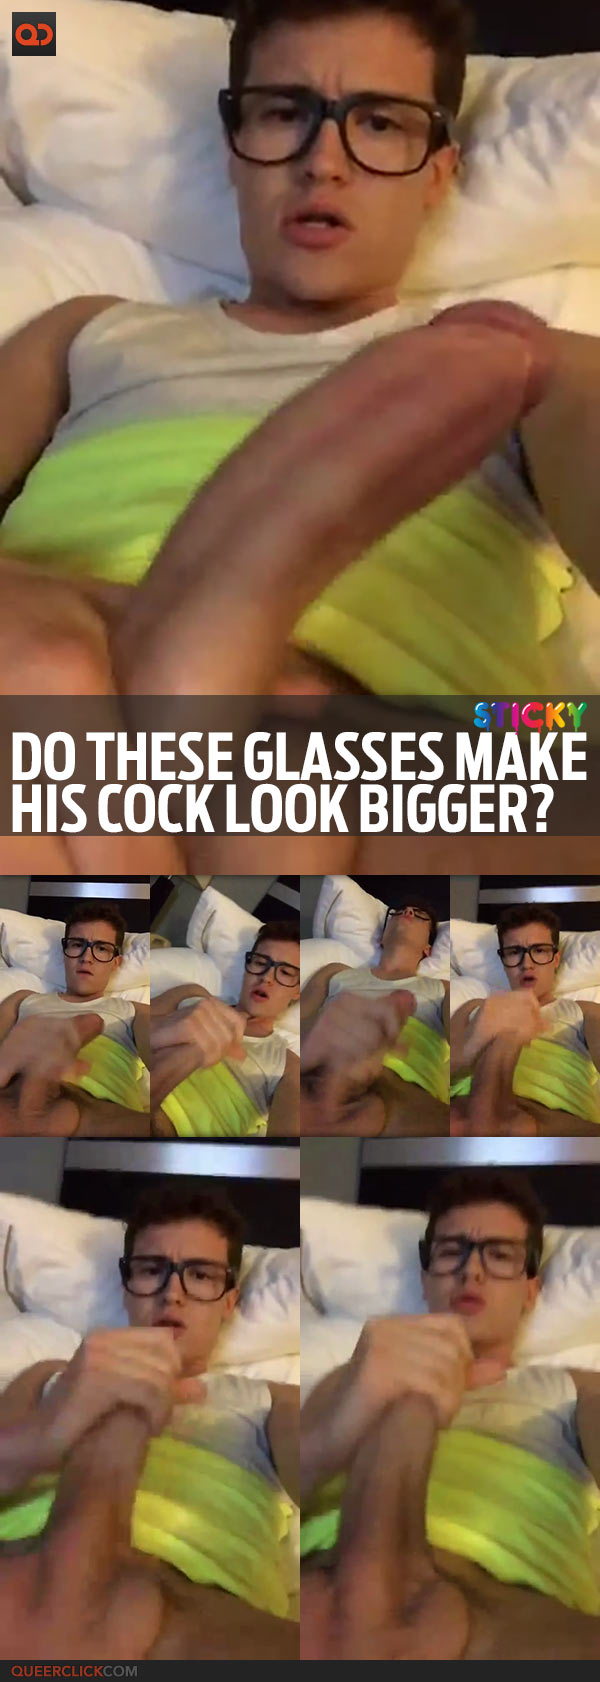 qc-sticky-wanking_with_glasses_on-teaser